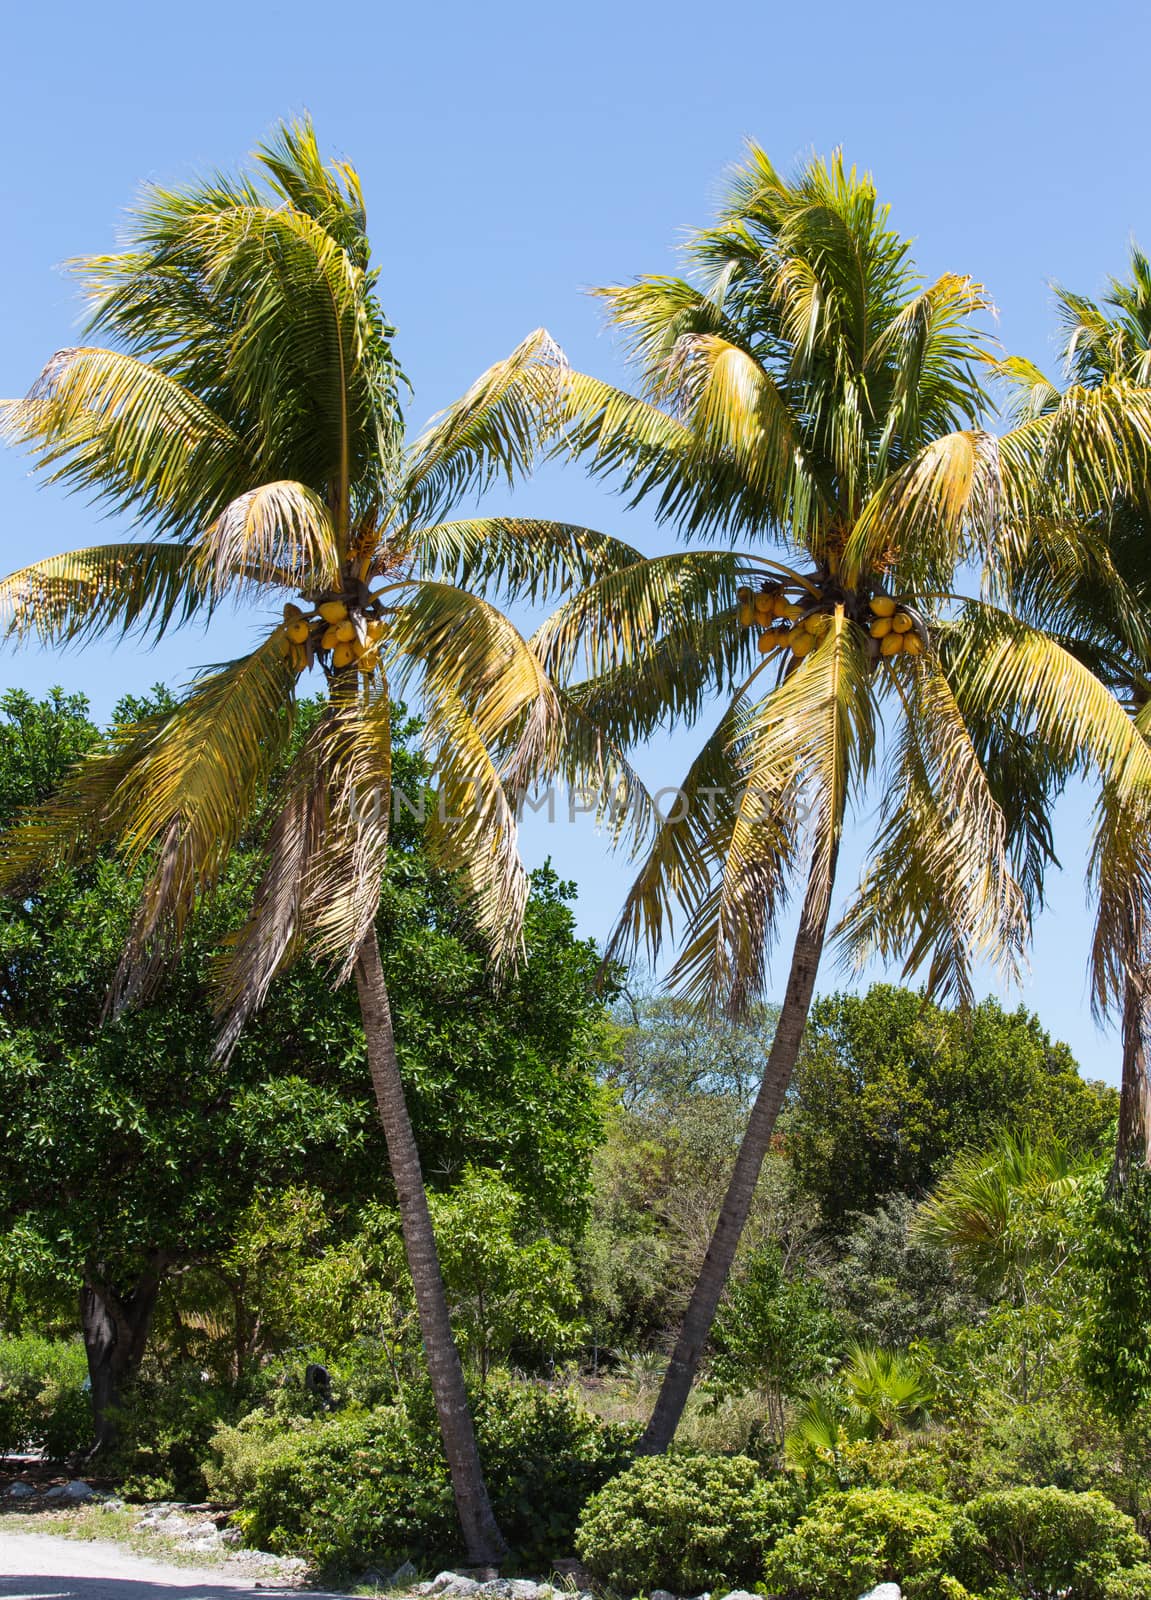 This image is of two palm trees in Key West loaded with coconuts.